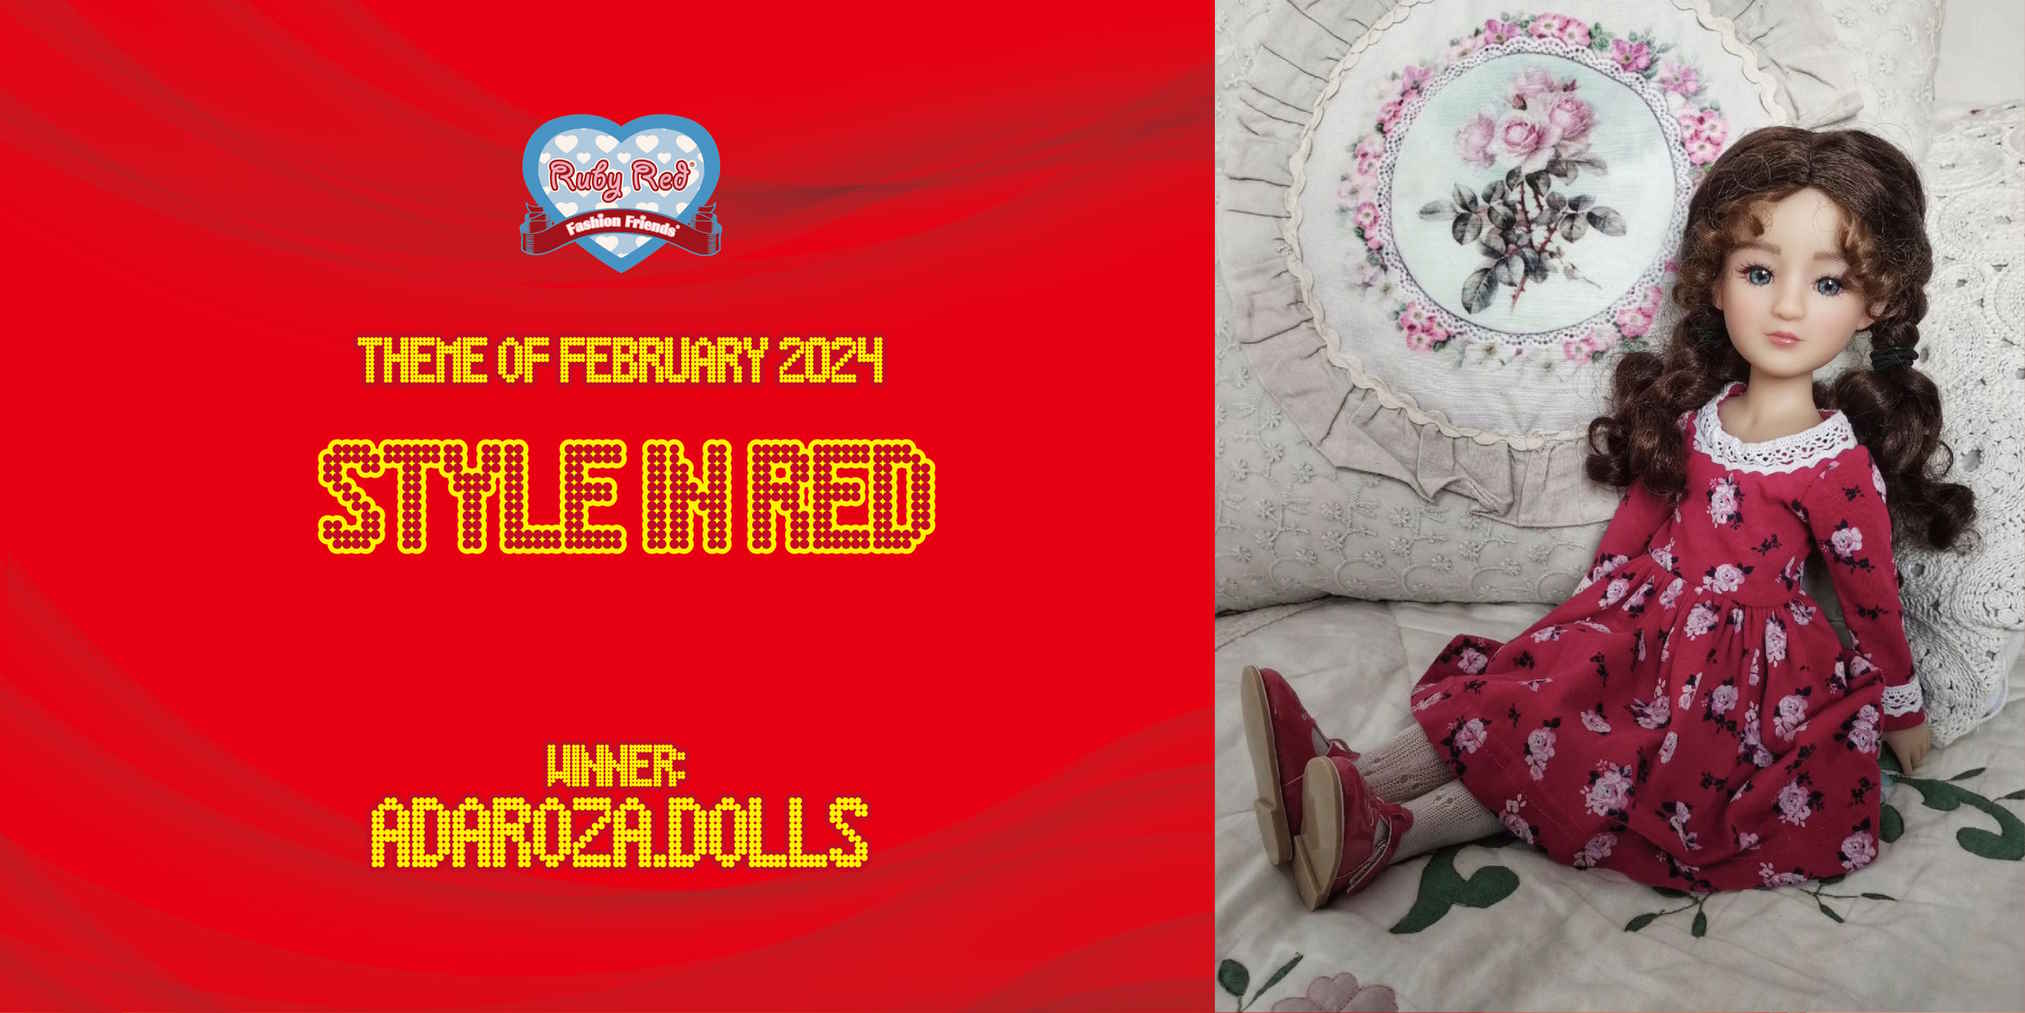 Ruby Red Fashion Friends Dolls - Photo of the month winner - Feb 2024